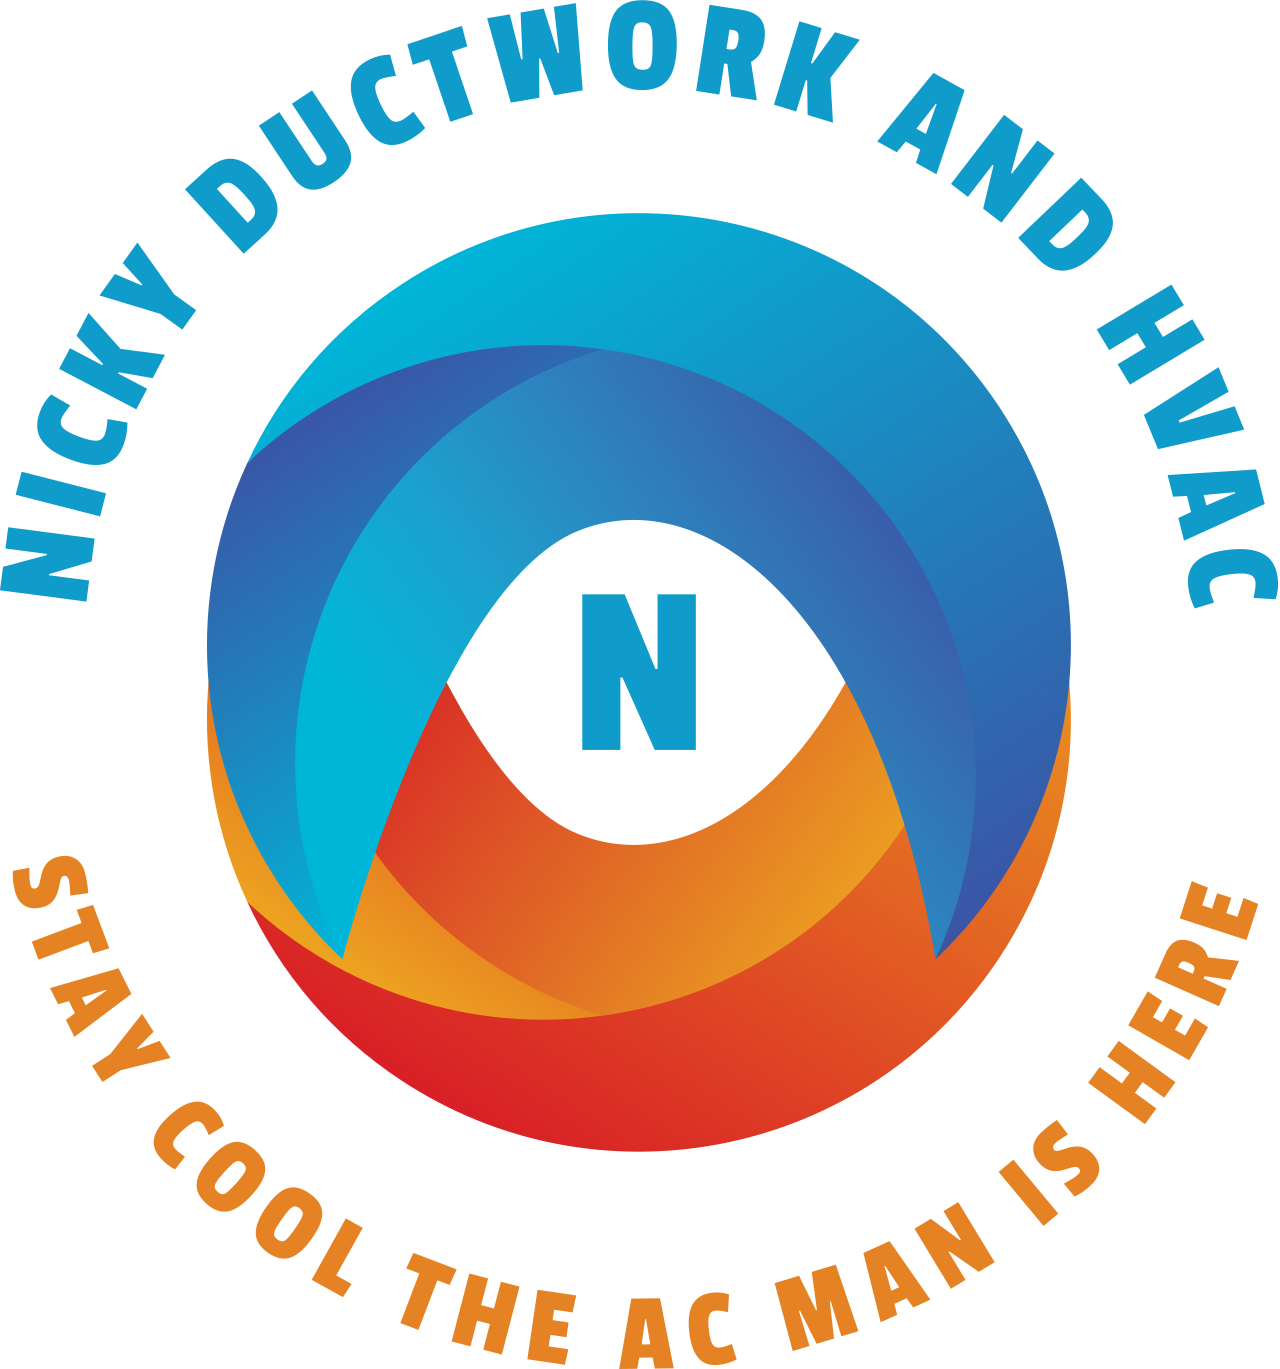 NICKY DUCTWORK AND HVAC's web page